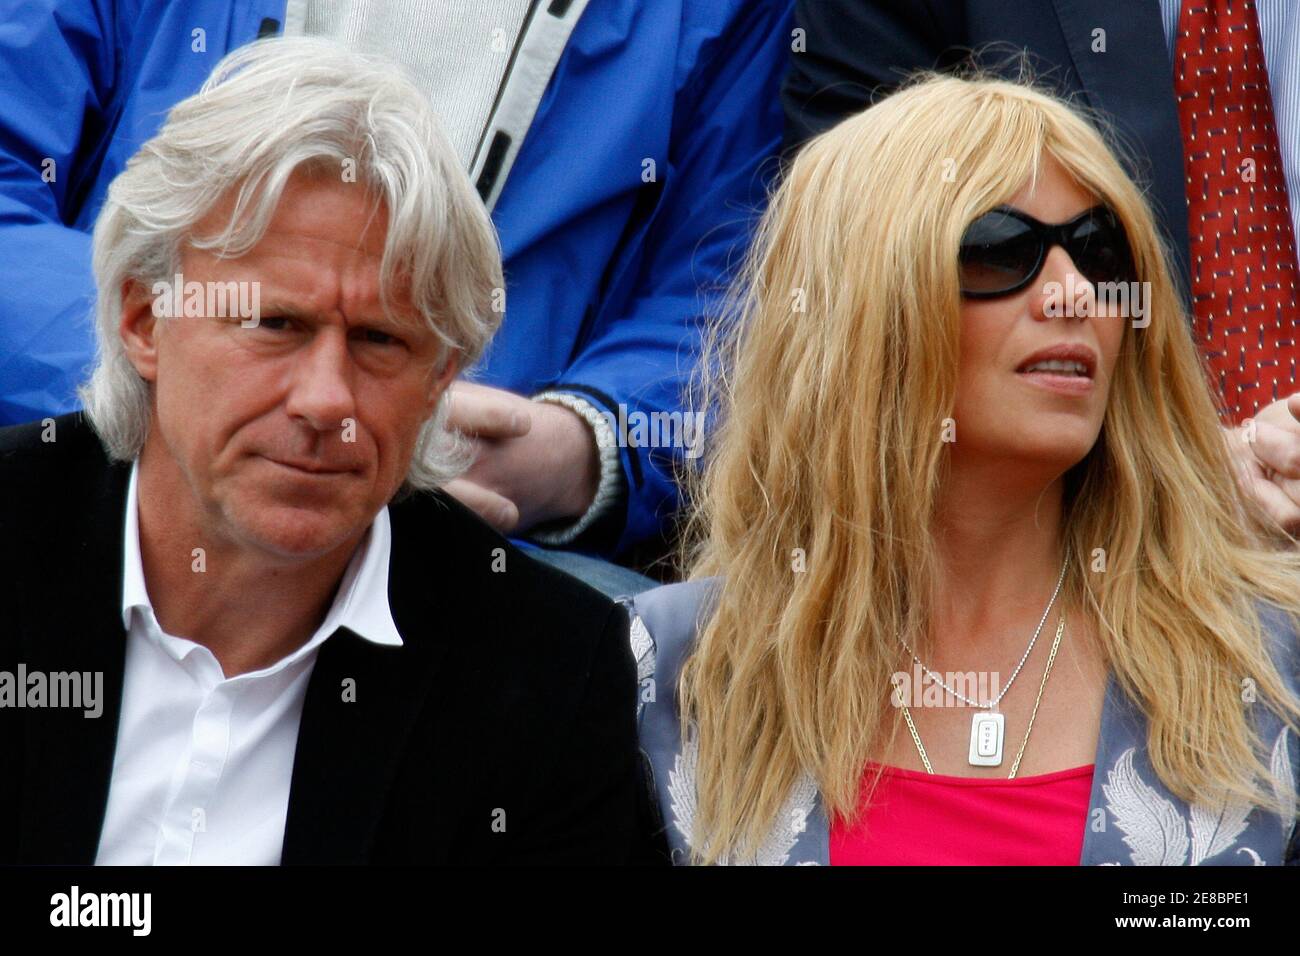 schoner Sociologie Trend Former tennis player Bjorn Borg (L) and his wife Patricia Ostfeldt watch a  match at the French Open tennis tournament at Roland Garros in Paris June  5, 2009. REUTERS/Charles Platiau (FRANCE ENTERTAINMENT